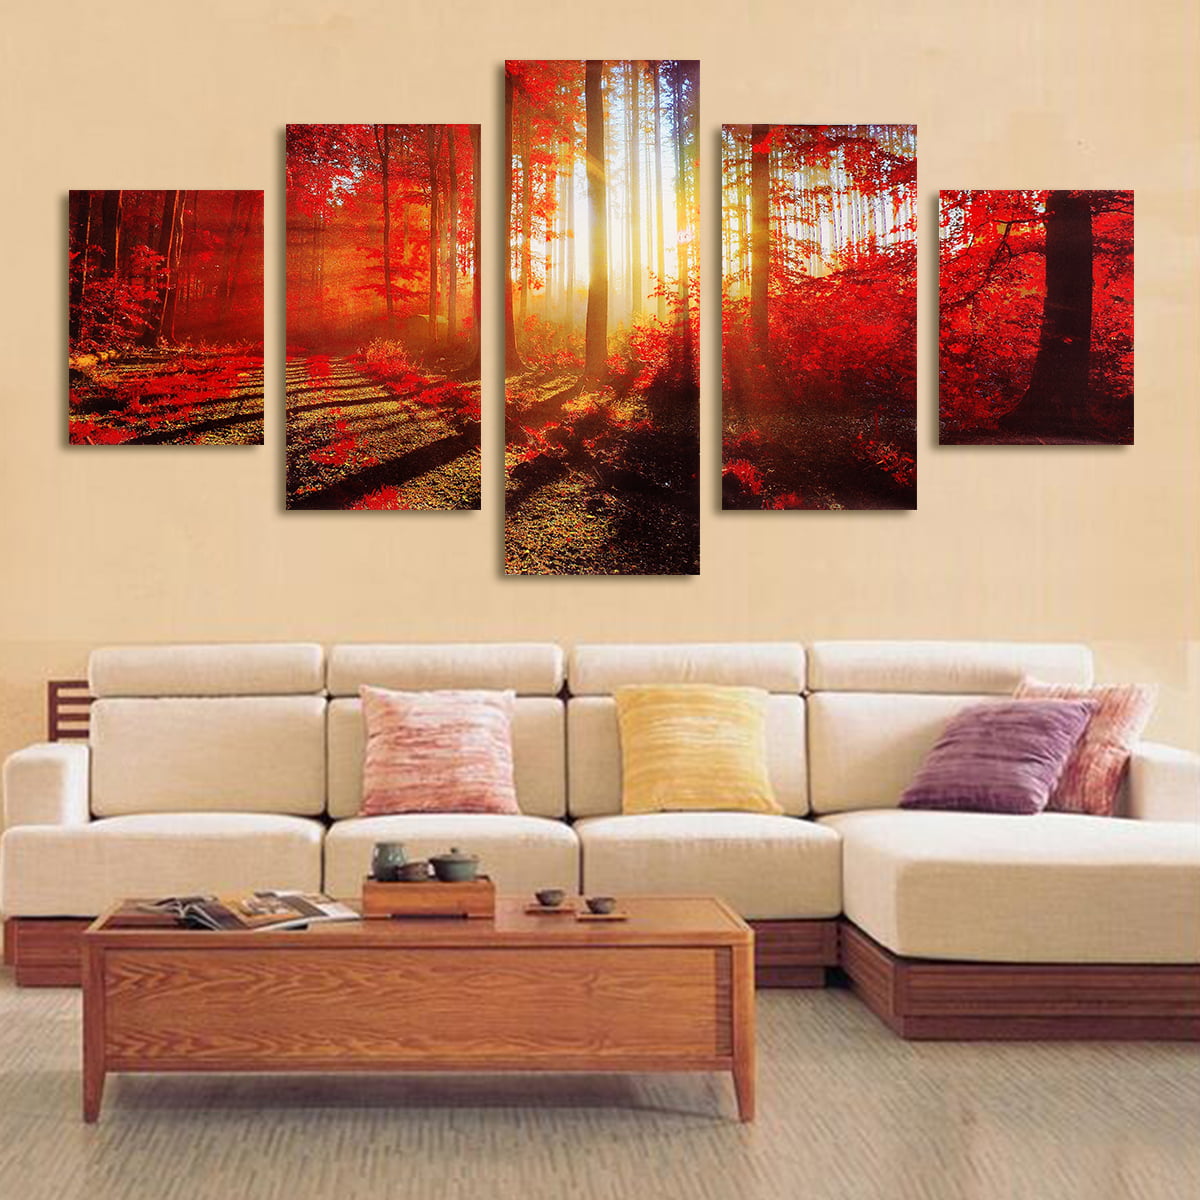 Unframed Modern Oil Painting Print Picture Home Wall Room Decoration 16x12in gjh